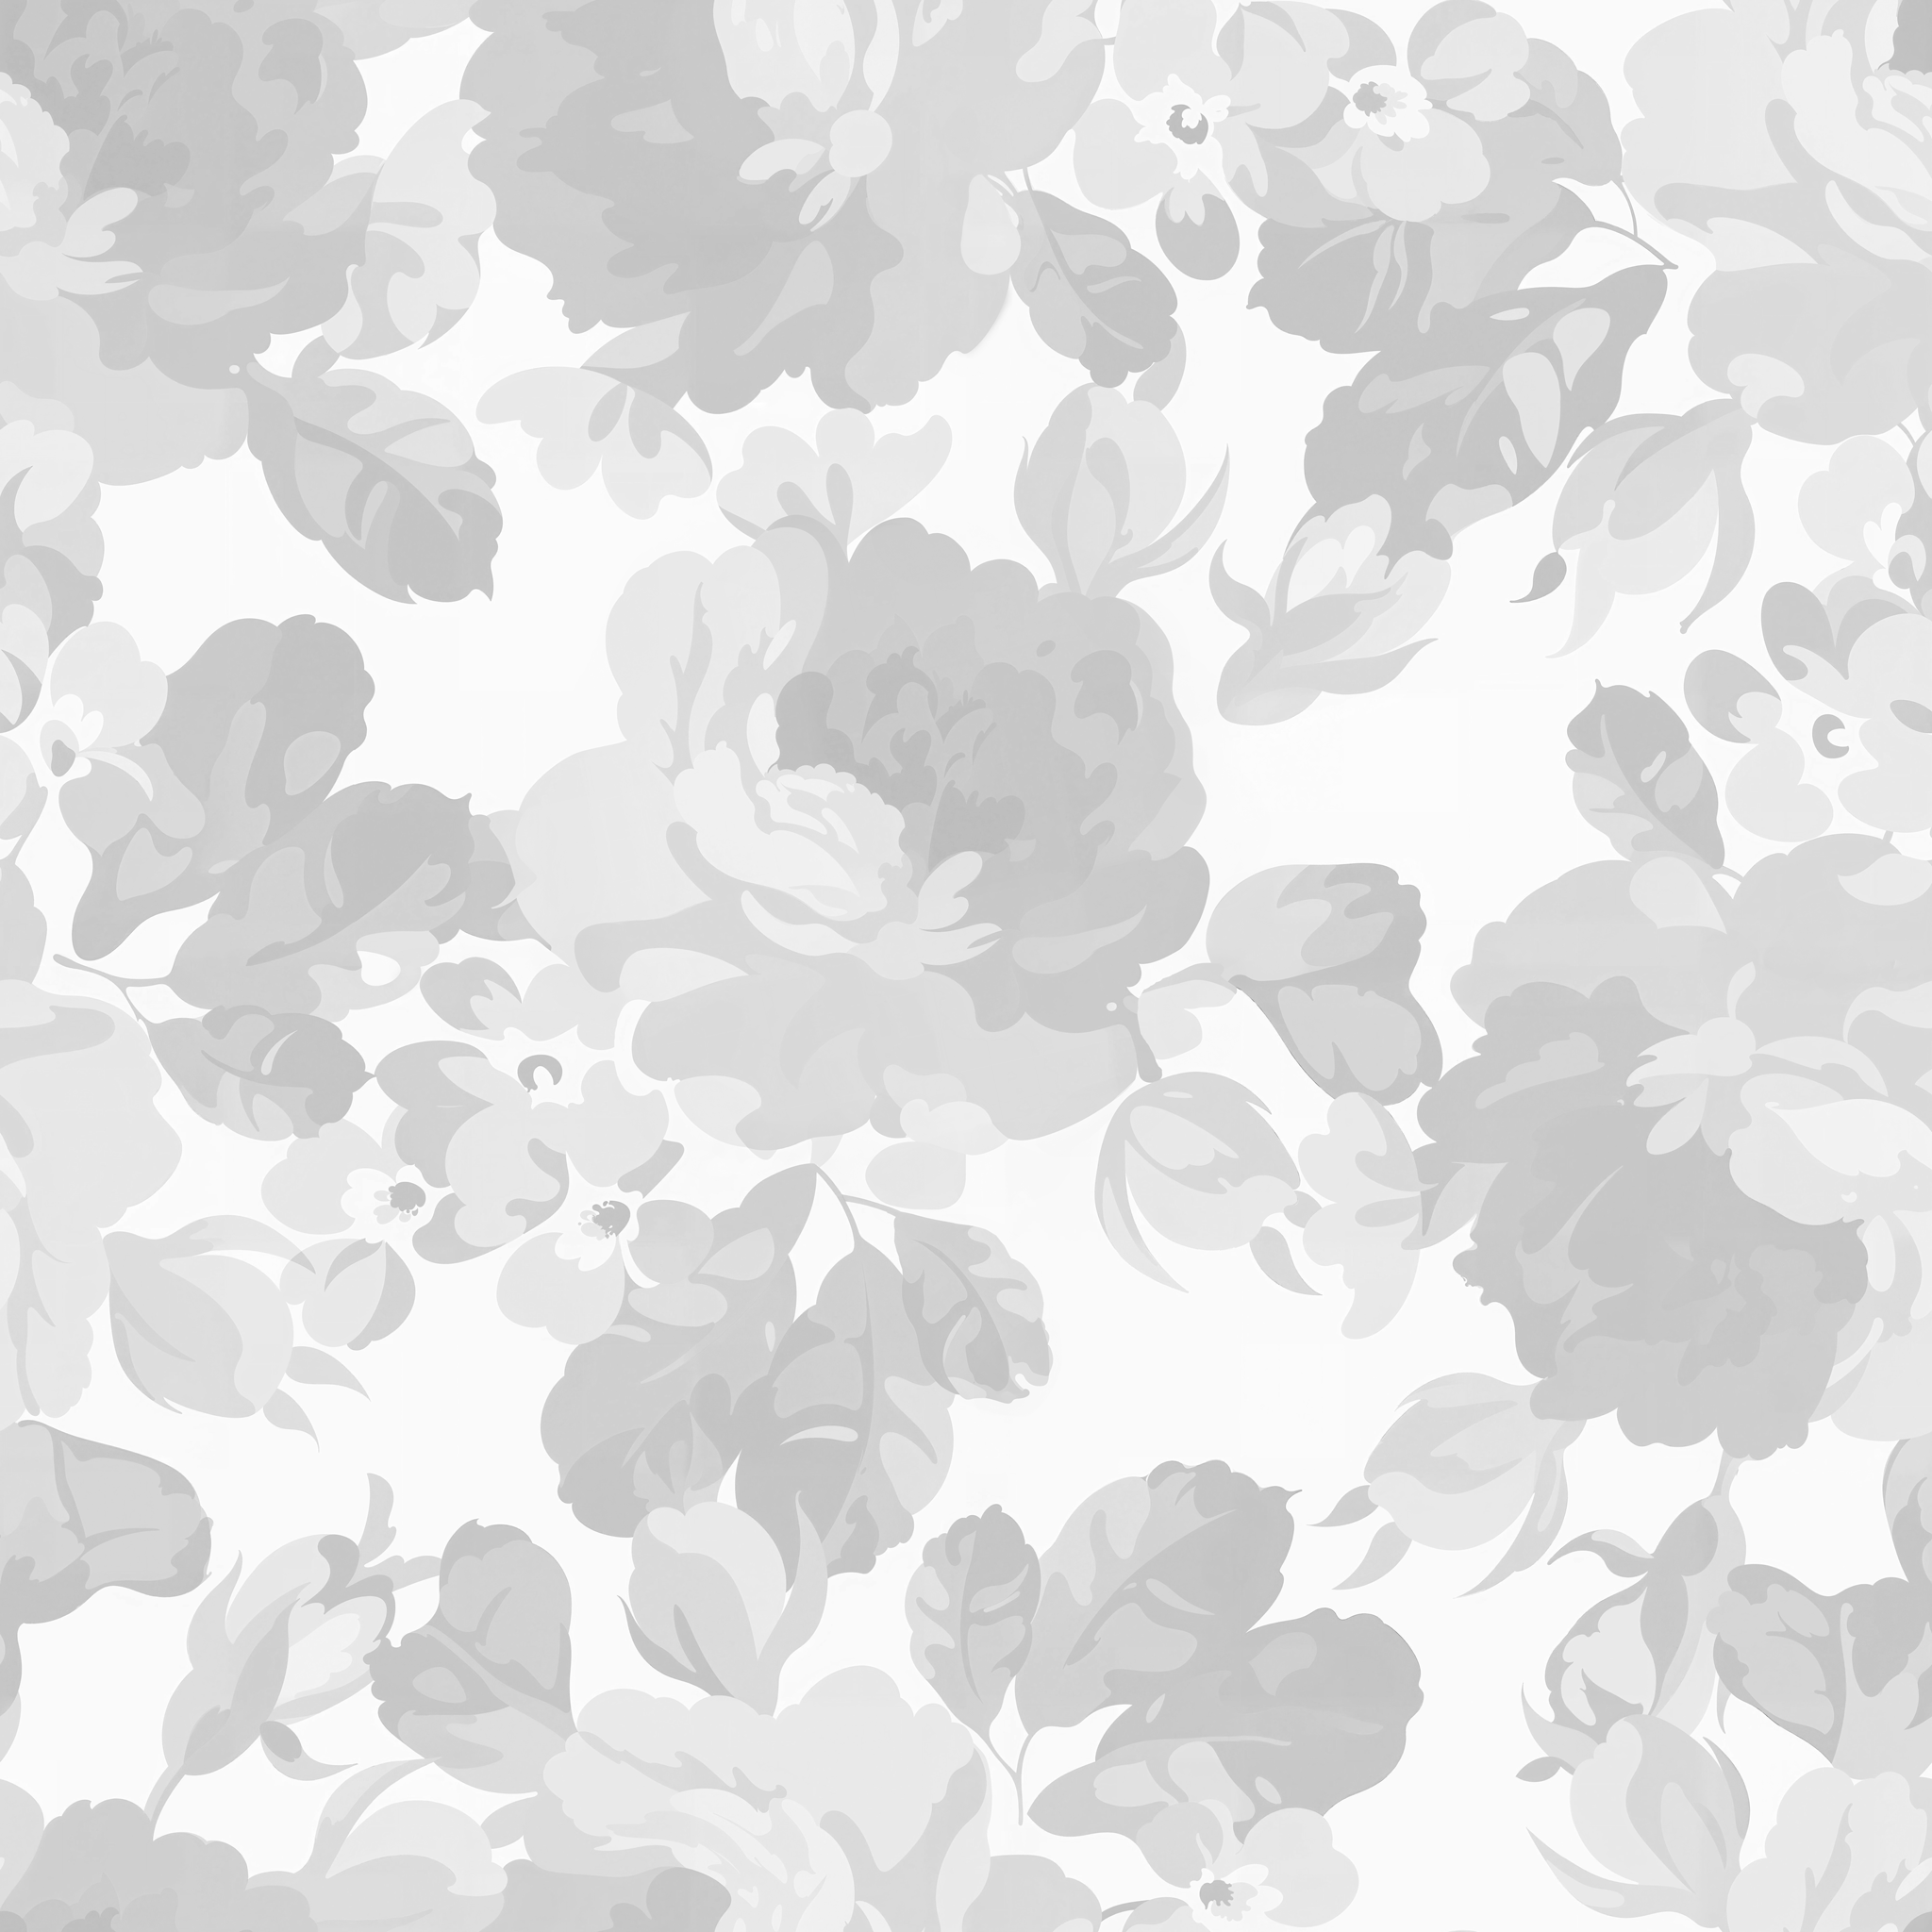 "Terra Bloom (Gray) Wallpaper by Wall Blush in a modern living room, floral patterns highlighted."